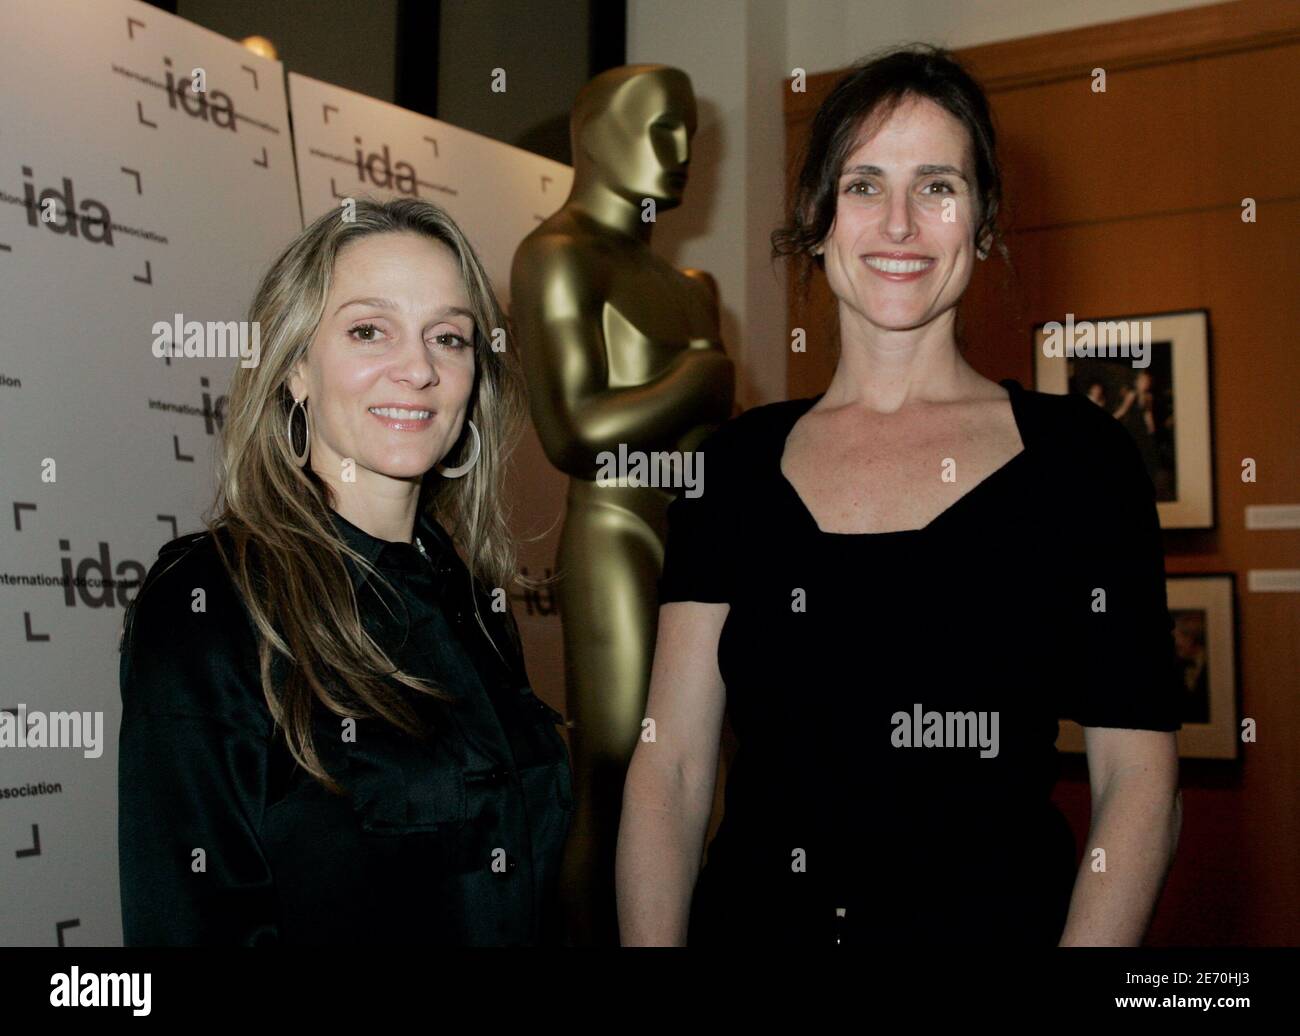 Academy Award nominees for best documentary short subject 'God Sleeps in Rwanda' directors, cinematographers,writers and producers Kimberlee Acquaro (L) and Stacy Sherman poses next to a large Oscar statue during a reception for nominees hosted by the International Documentary Association in Beverly Hills, California March 1, 2006. [The film follows five women who survived the 1994 Rwandan genocide as they work to rebuild their lives. The Academy Awards will be presented March 5 in Hollywood.] Stock Photo